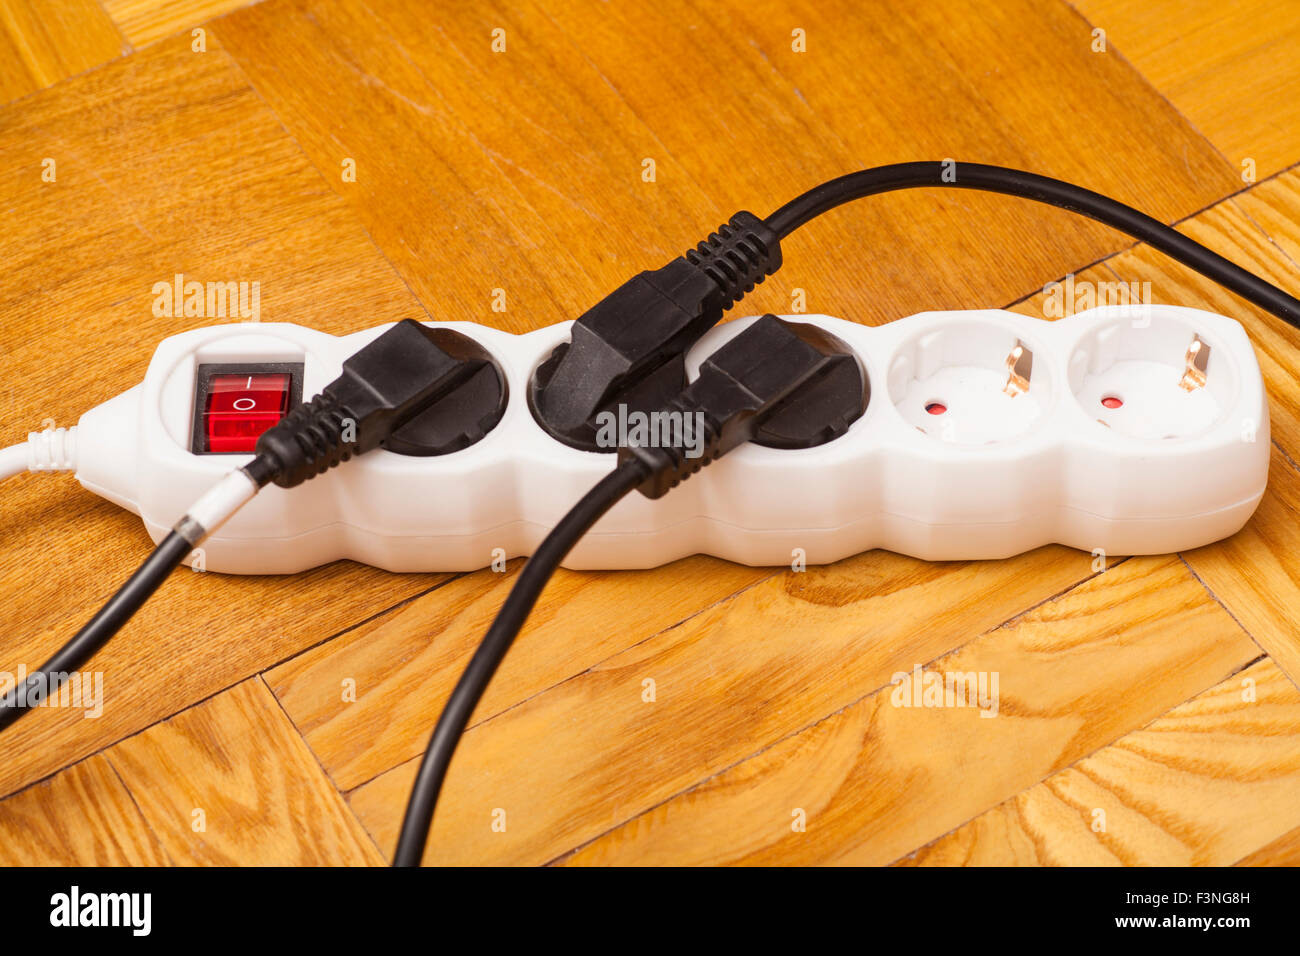 Many plugs plugged into electric power bar on floor Stock Photo